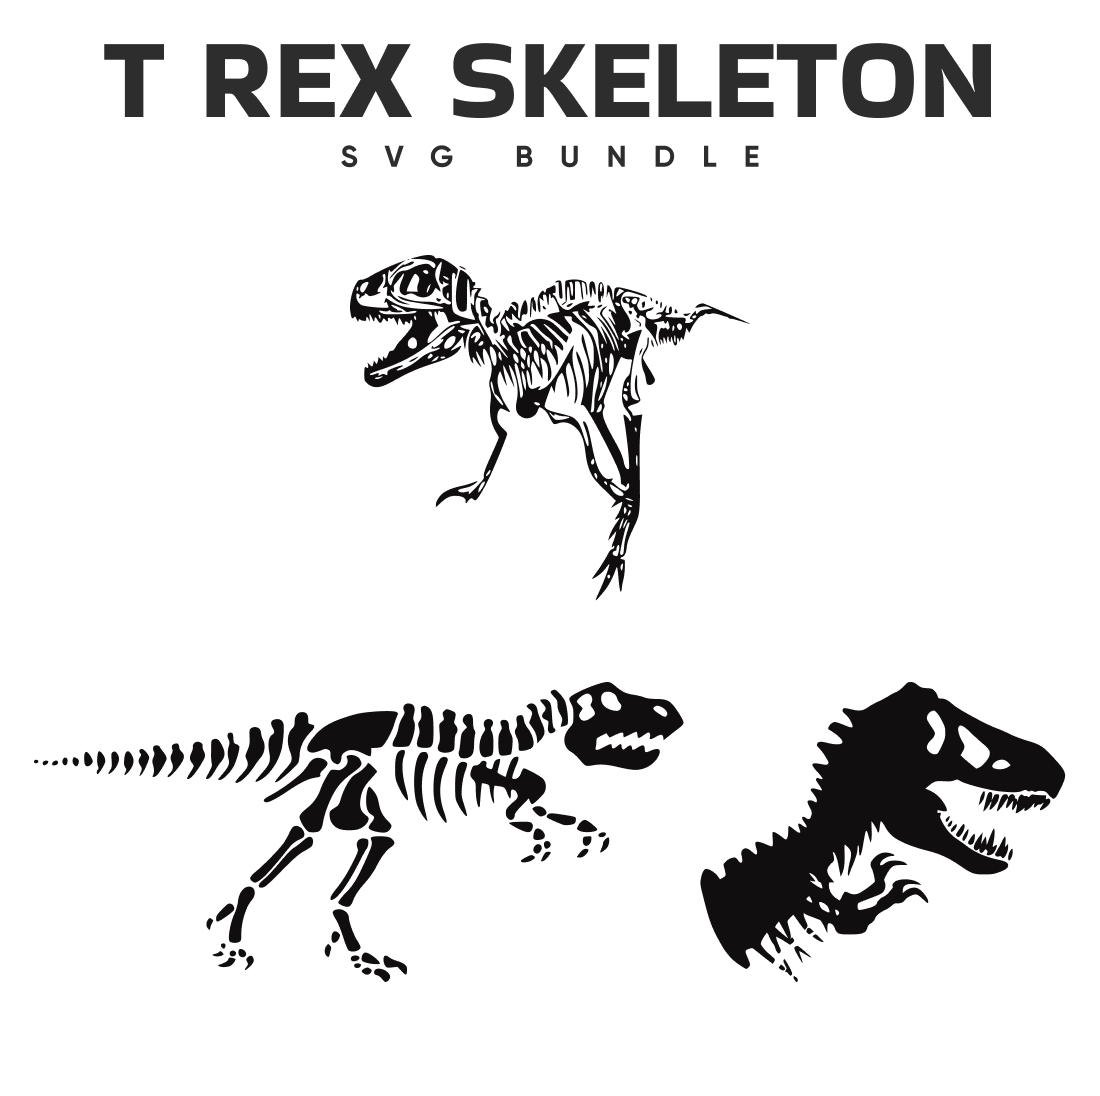 Black and white image of a t - rex skeleton and a t - rex.